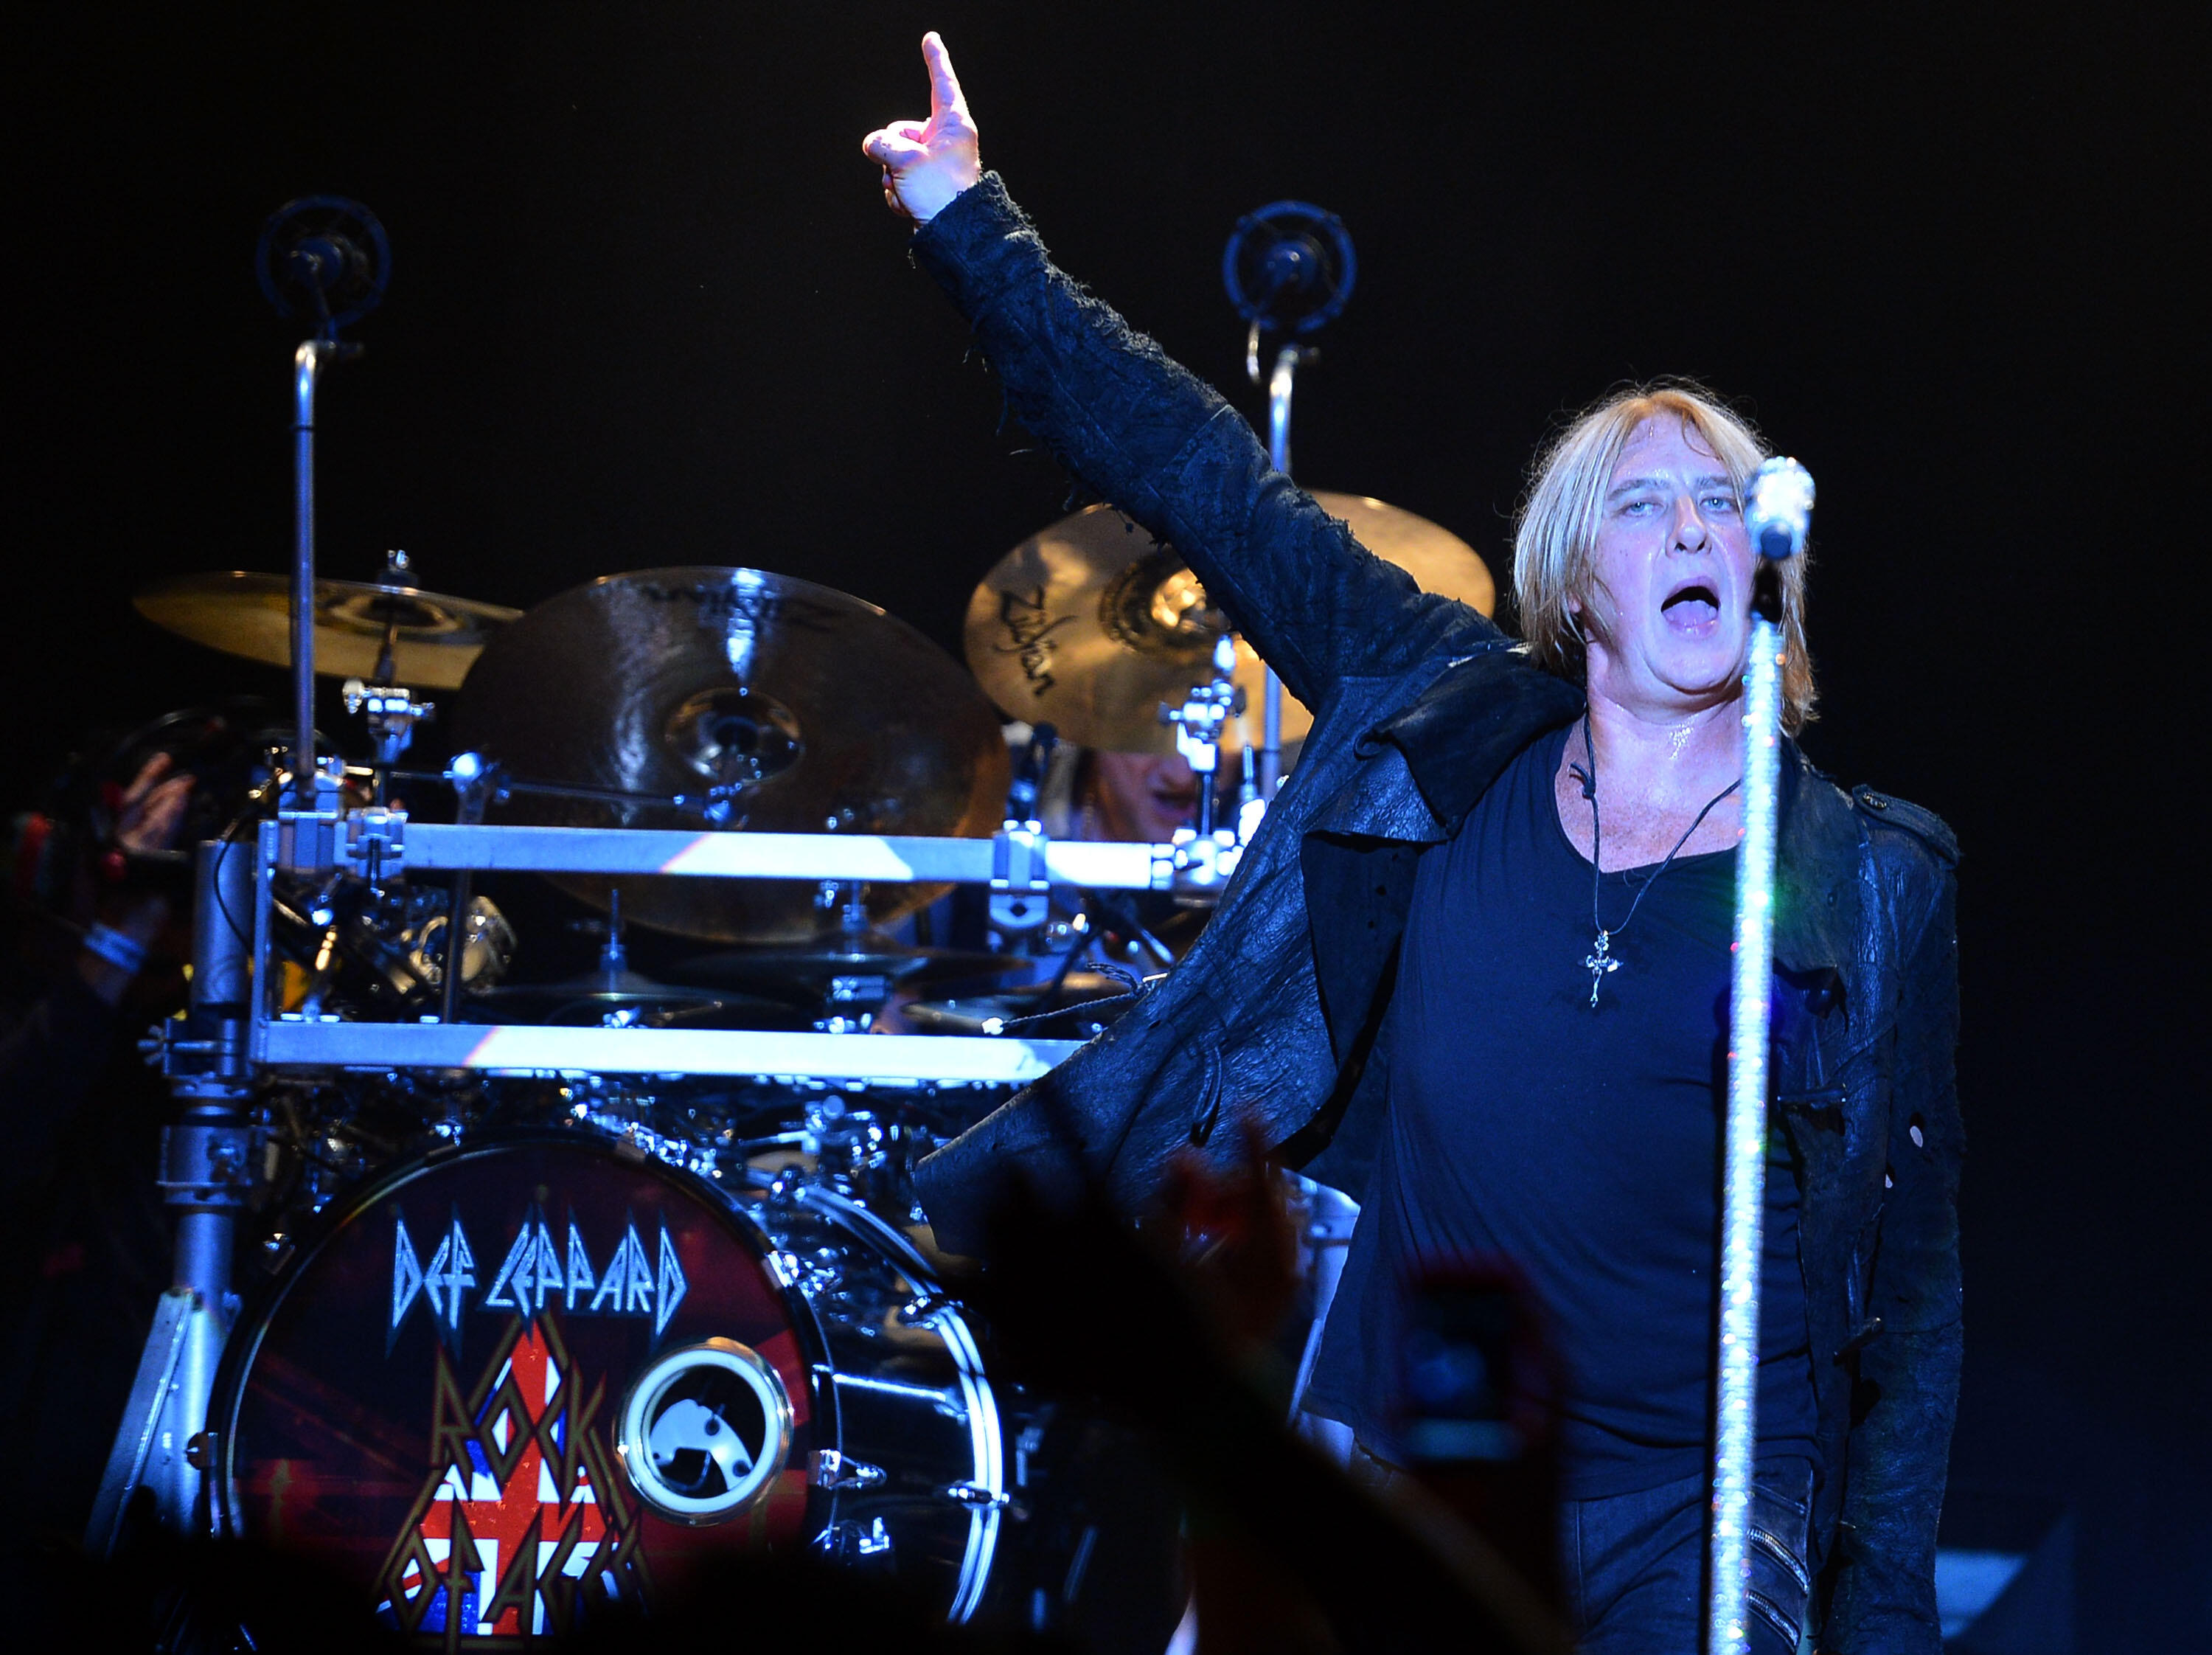 Def Leppard Becomes Latest Rock Band To Jump On Craft Beer Craze - Thumbnail Image